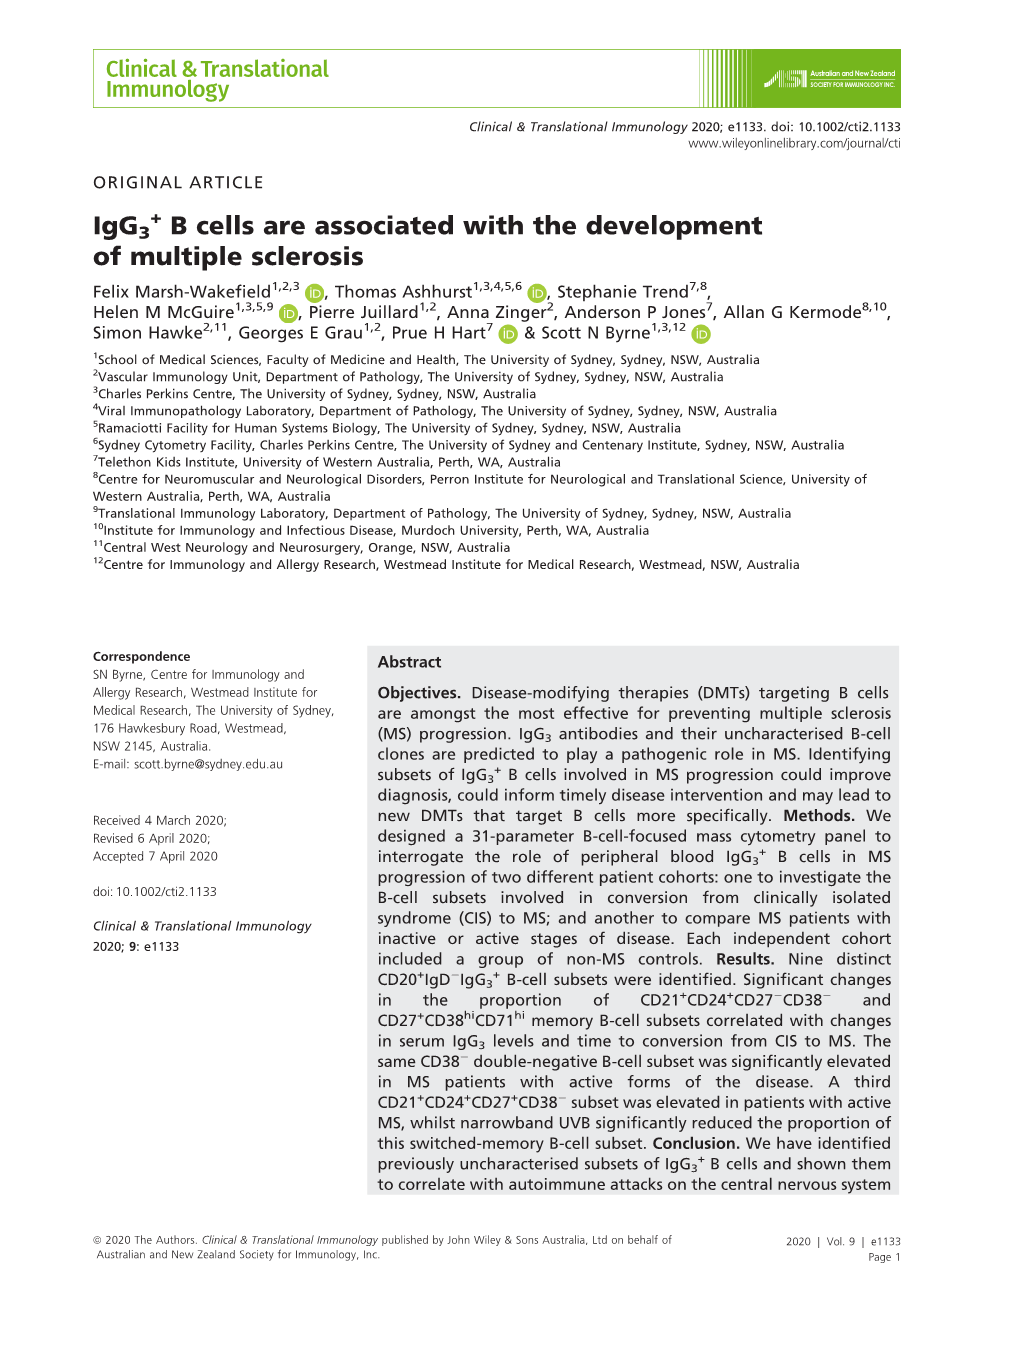 Igg3+ B Cells Are Associated with the Development of Multiple Sclerosis